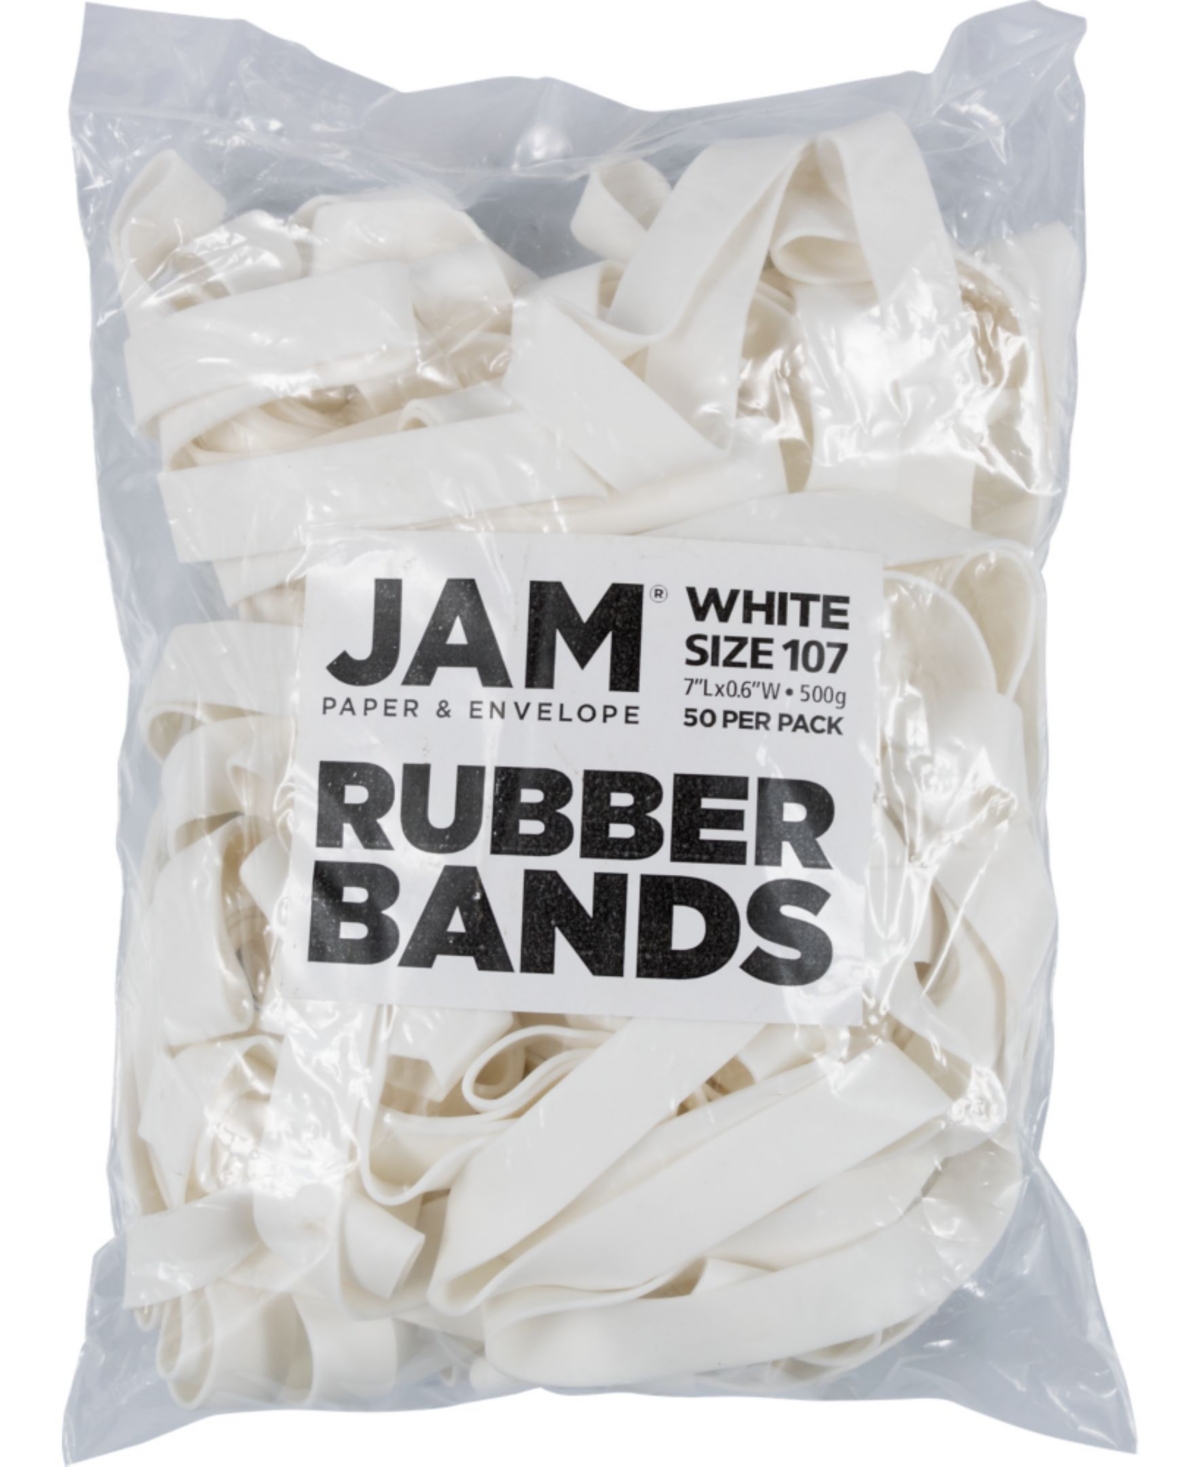 Jam Paper Durable Rubber Bands In White